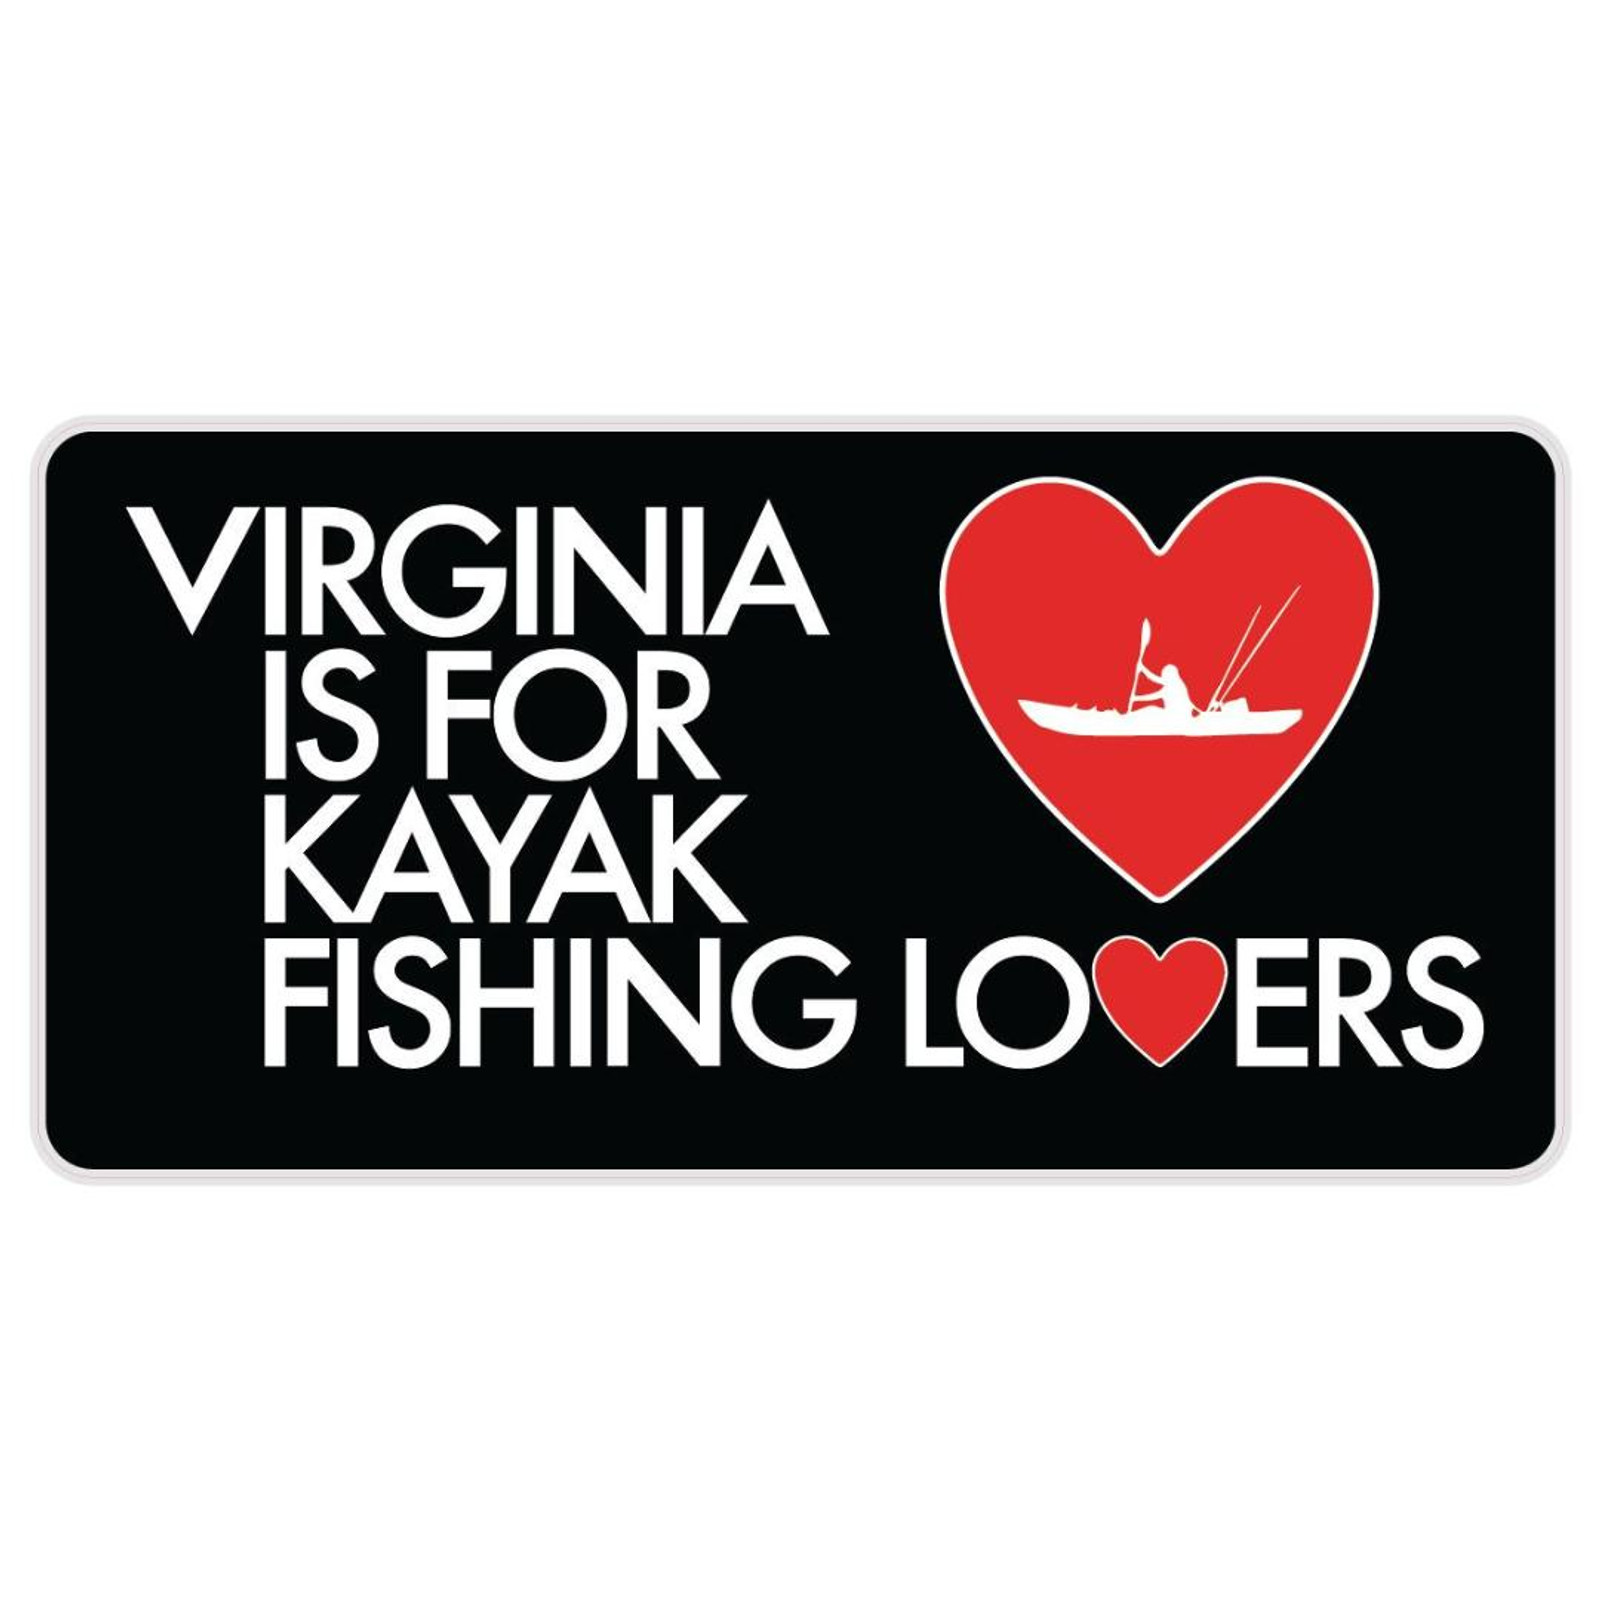  Virginia is for Kayak Lovers Decal 3.75" x 2" 